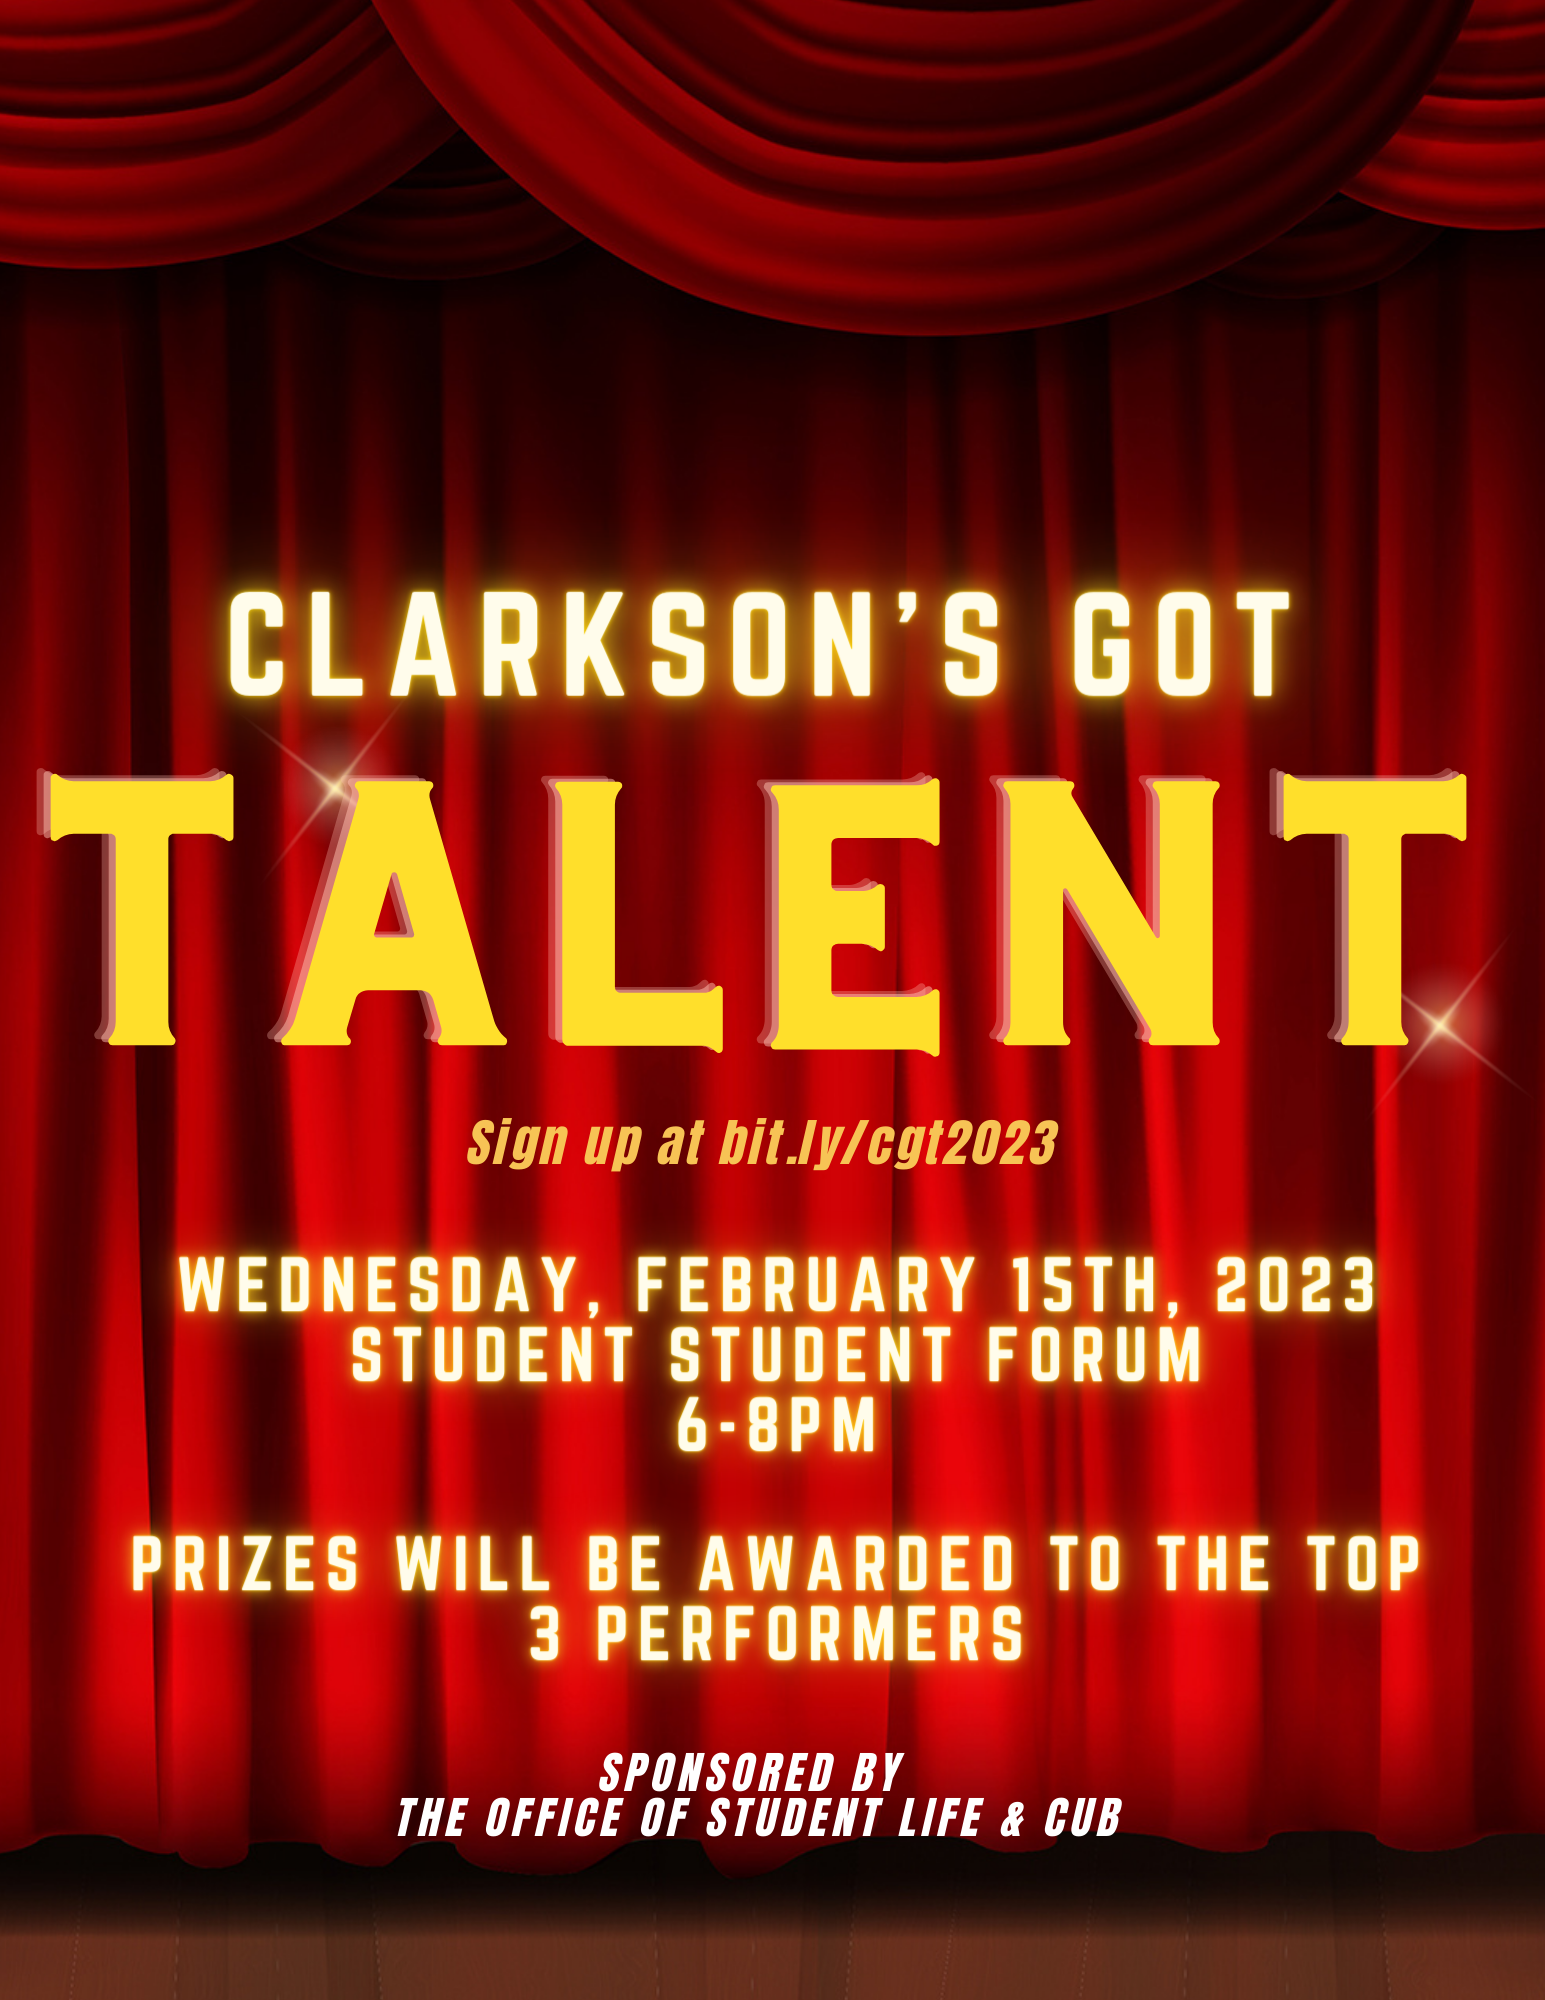 10th Annual Clarkson’s Got Talent Sign ups are Live!